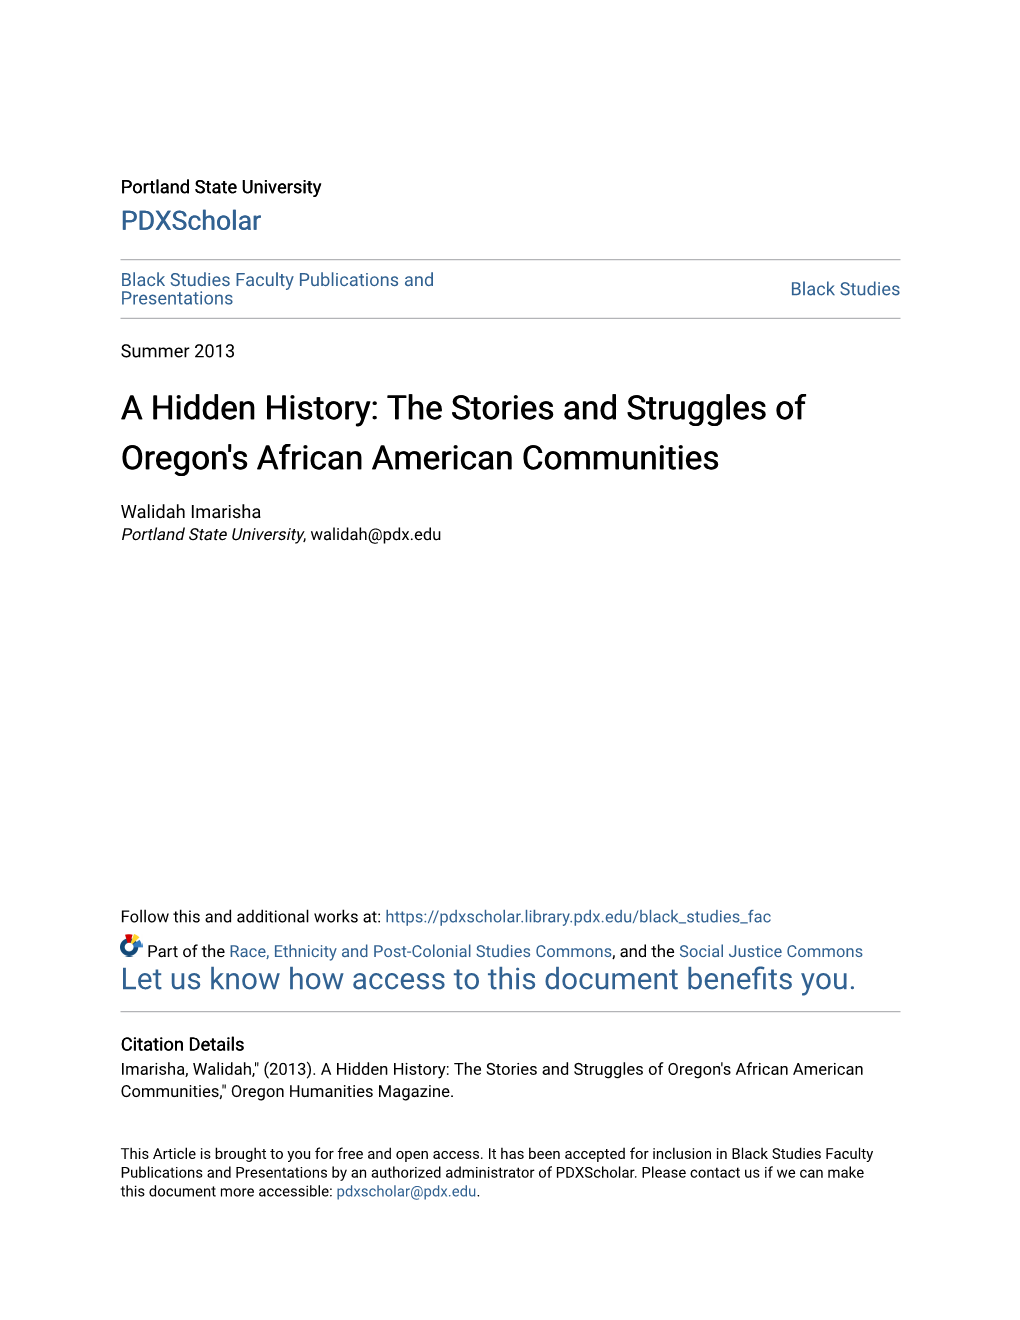 A Hidden History: the Stories and Struggles of Oregon's African American Communities